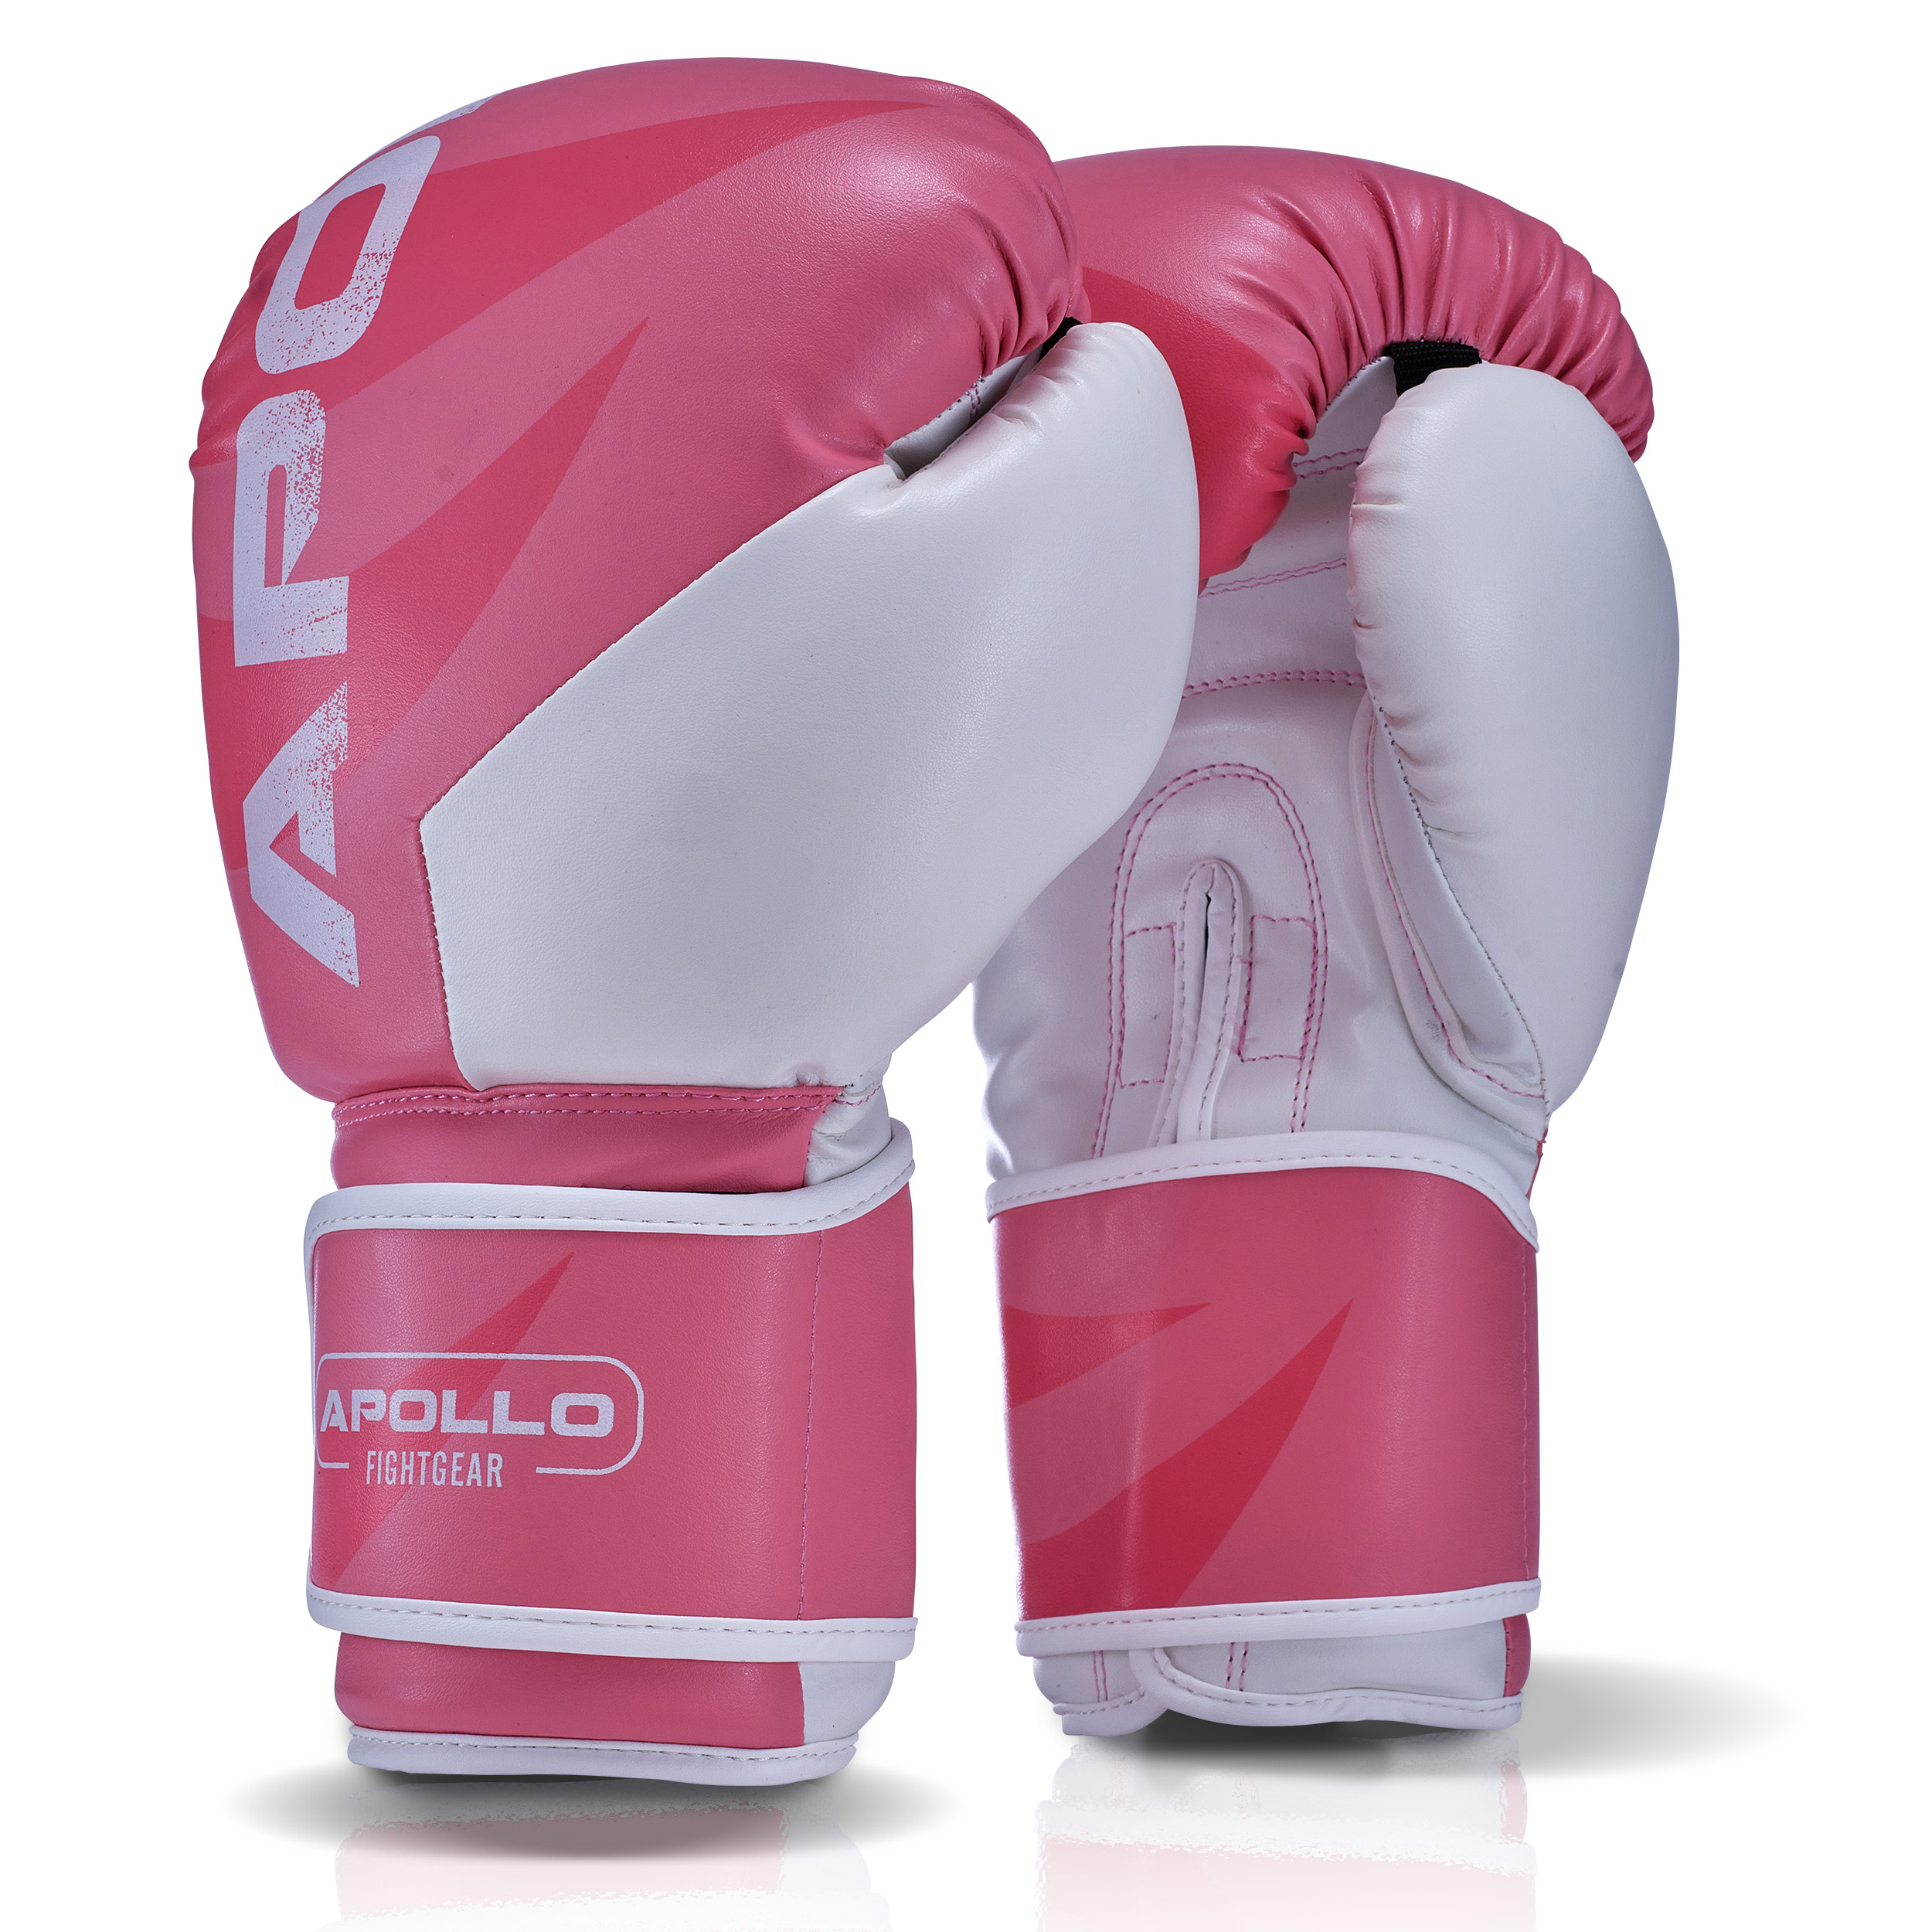 Apollo Boxhandschuh Champion Pink Weiss 16oz